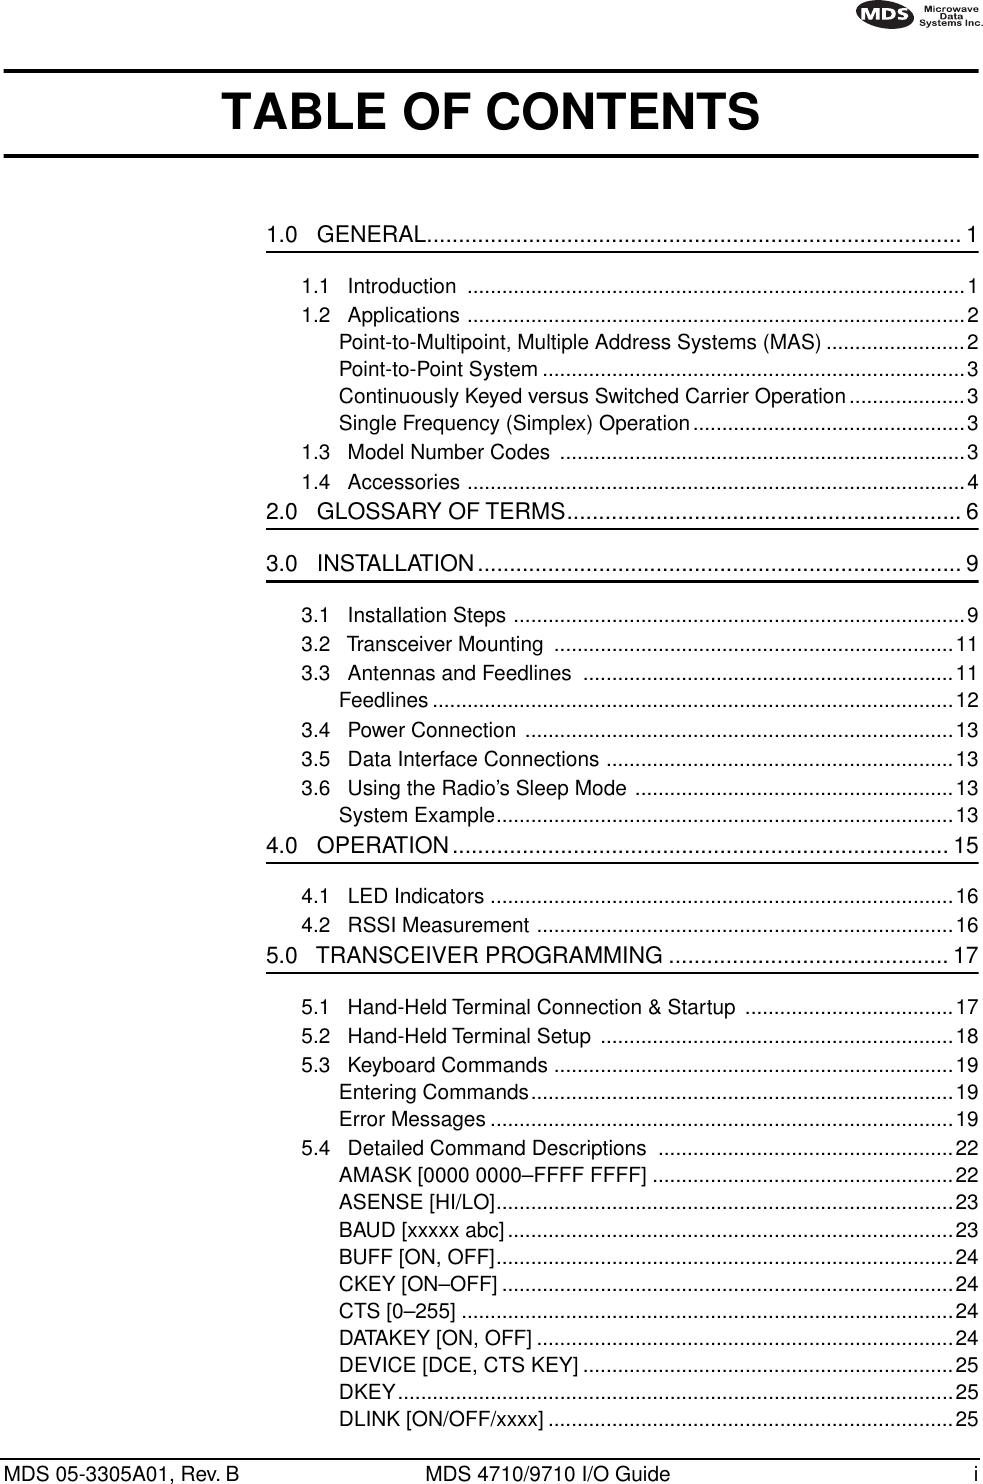  MDS 05-3305A01, Rev. B MDS 4710/9710 I/O Guide i        TABLE OF CONTENTS 1.0   GENERAL.................................................................................... 1 1.1   Introduction  ......................................................................................11.2   Applications ......................................................................................2Point-to-Multipoint, Multiple Address Systems (MAS) ........................2Point-to-Point System .........................................................................3Continuously Keyed versus Switched Carrier Operation....................3Single Frequency (Simplex) Operation...............................................31.3   Model Number Codes  ......................................................................31.4   Accessories ......................................................................................4 2.0   GLOSSARY OF TERMS.............................................................. 6 3.0   INSTALLATION............................................................................ 9 3.1   Installation Steps ..............................................................................93.2   Transceiver Mounting  .....................................................................113.3   Antennas and Feedlines  ................................................................11Feedlines ..........................................................................................123.4   Power Connection ..........................................................................133.5   Data Interface Connections ............................................................133.6   Using the Radio’s Sleep Mode .......................................................13System Example...............................................................................13 4.0   OPERATION.............................................................................. 15 4.1   LED Indicators ................................................................................164.2   RSSI Measurement ........................................................................16 5.0   TRANSCEIVER PROGRAMMING ............................................ 17 5.1   Hand-Held Terminal Connection &amp; Startup  ....................................175.2   Hand-Held Terminal Setup .............................................................185.3   Keyboard Commands .....................................................................19Entering Commands.........................................................................19Error Messages ................................................................................195.4   Detailed Command Descriptions  ...................................................22AMASK [0000 0000–FFFF FFFF] ....................................................22ASENSE [HI/LO]...............................................................................23BAUD [xxxxx abc] .............................................................................23BUFF [ON, OFF]...............................................................................24CKEY [ON–OFF] ..............................................................................24CTS [0–255] .....................................................................................24DATAKEY [ON, OFF] ........................................................................24DEVICE [DCE, CTS KEY] ................................................................25DKEY................................................................................................25DLINK [ON/OFF/xxxx] ......................................................................25